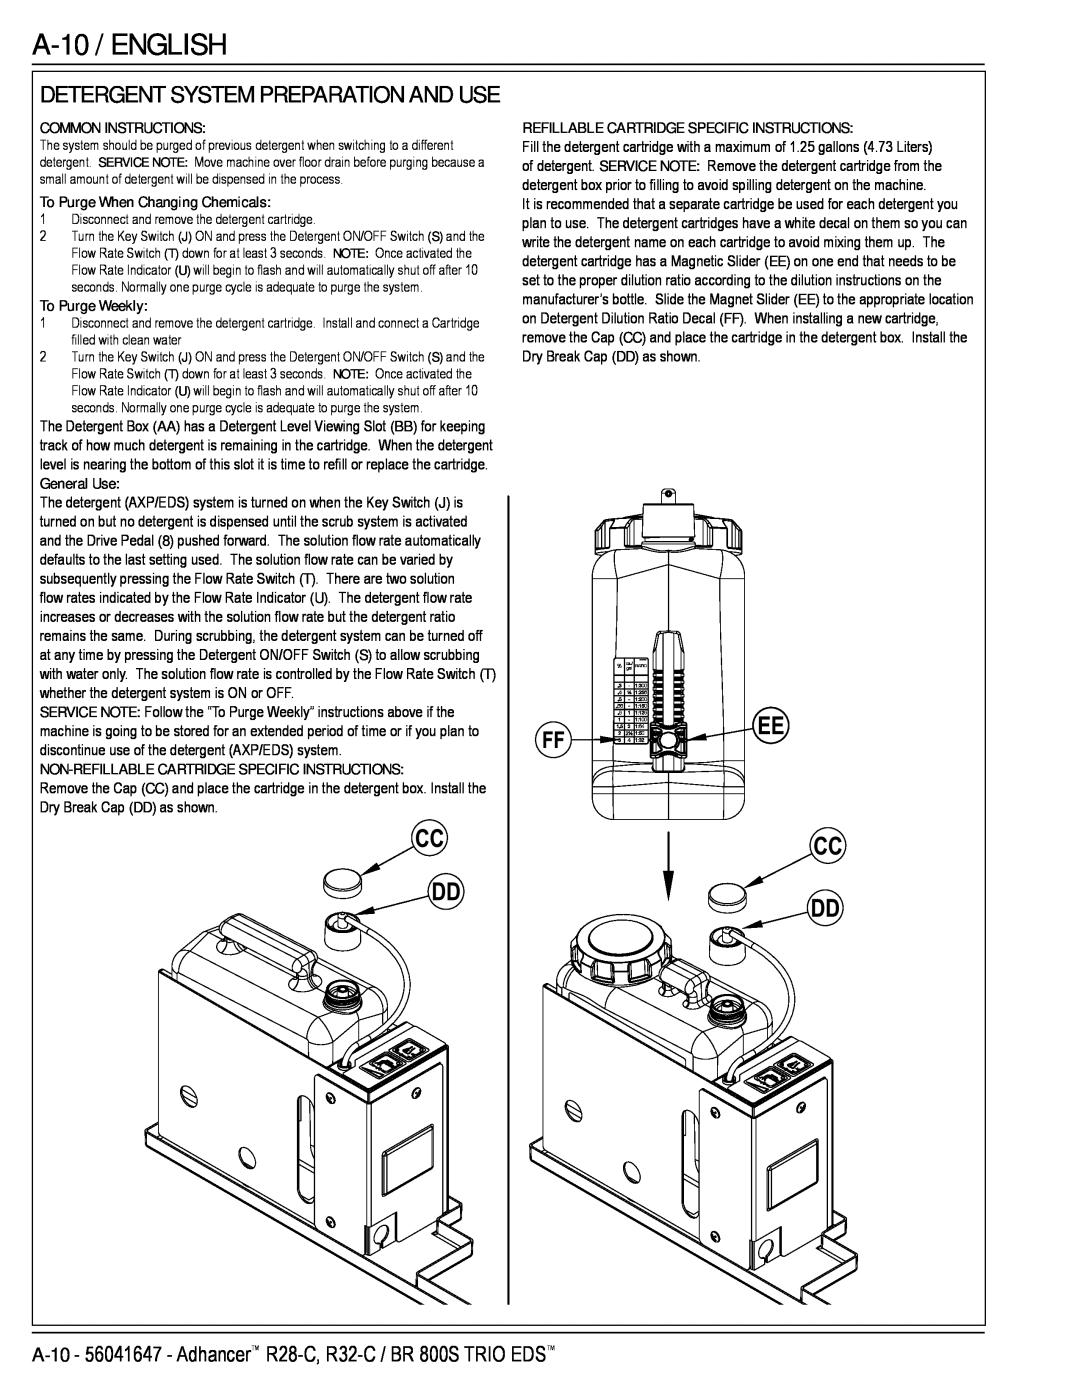 Nilfisk-Advance America 56316026 (R32-C) manual A-10 /ENGLISH, Detergent System Preparation And Use, Common Instructions 